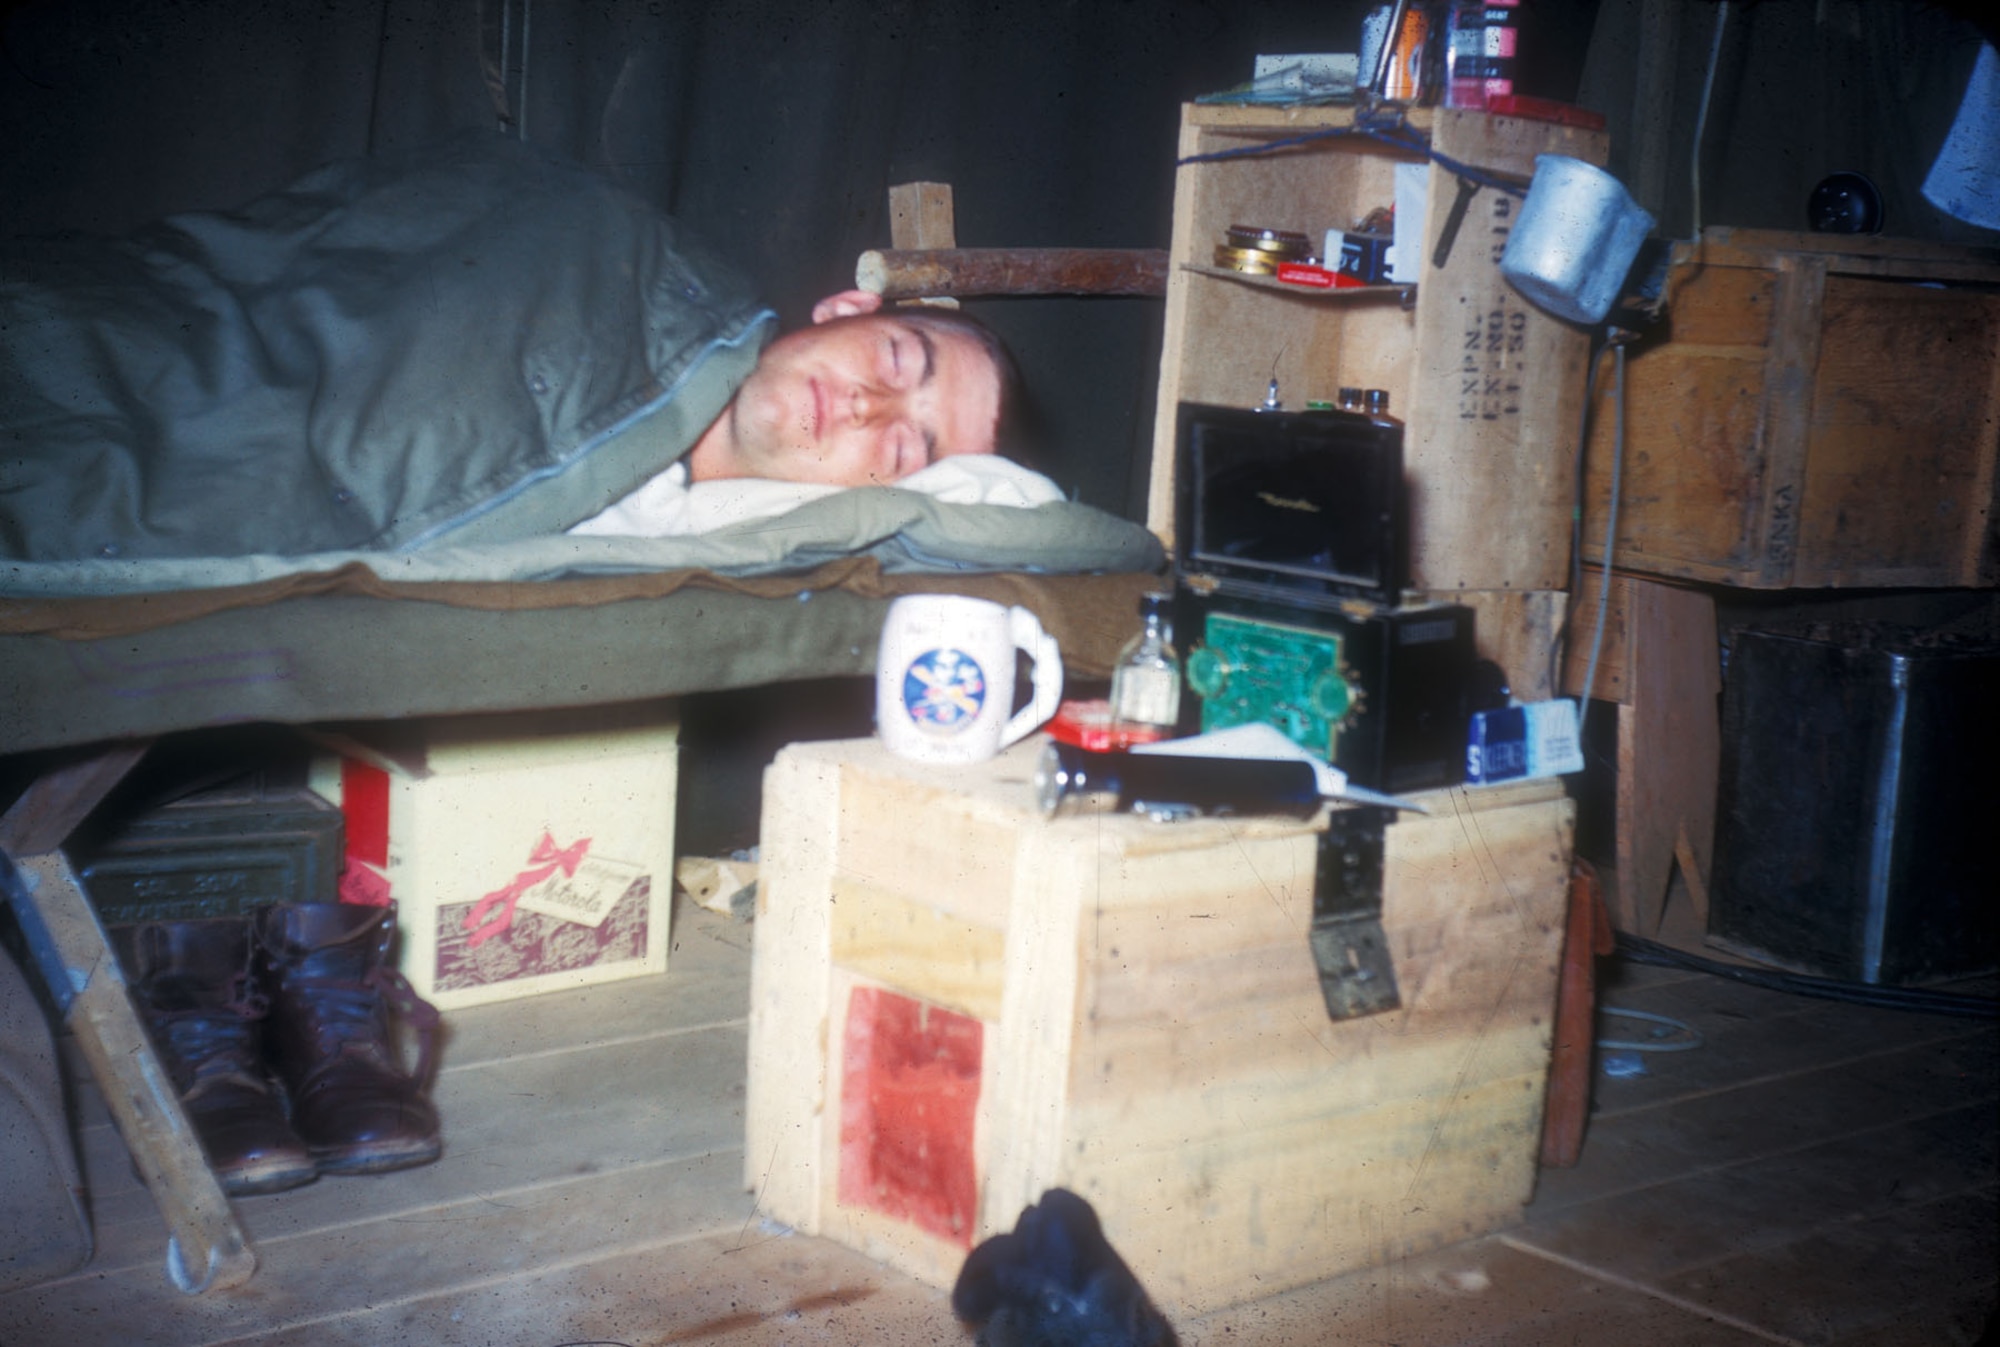 This Airman is stealing some badly-needed rest between missions. His meager possessions are kept in and on scavenged supply crates. (U.S. Air Force photo)